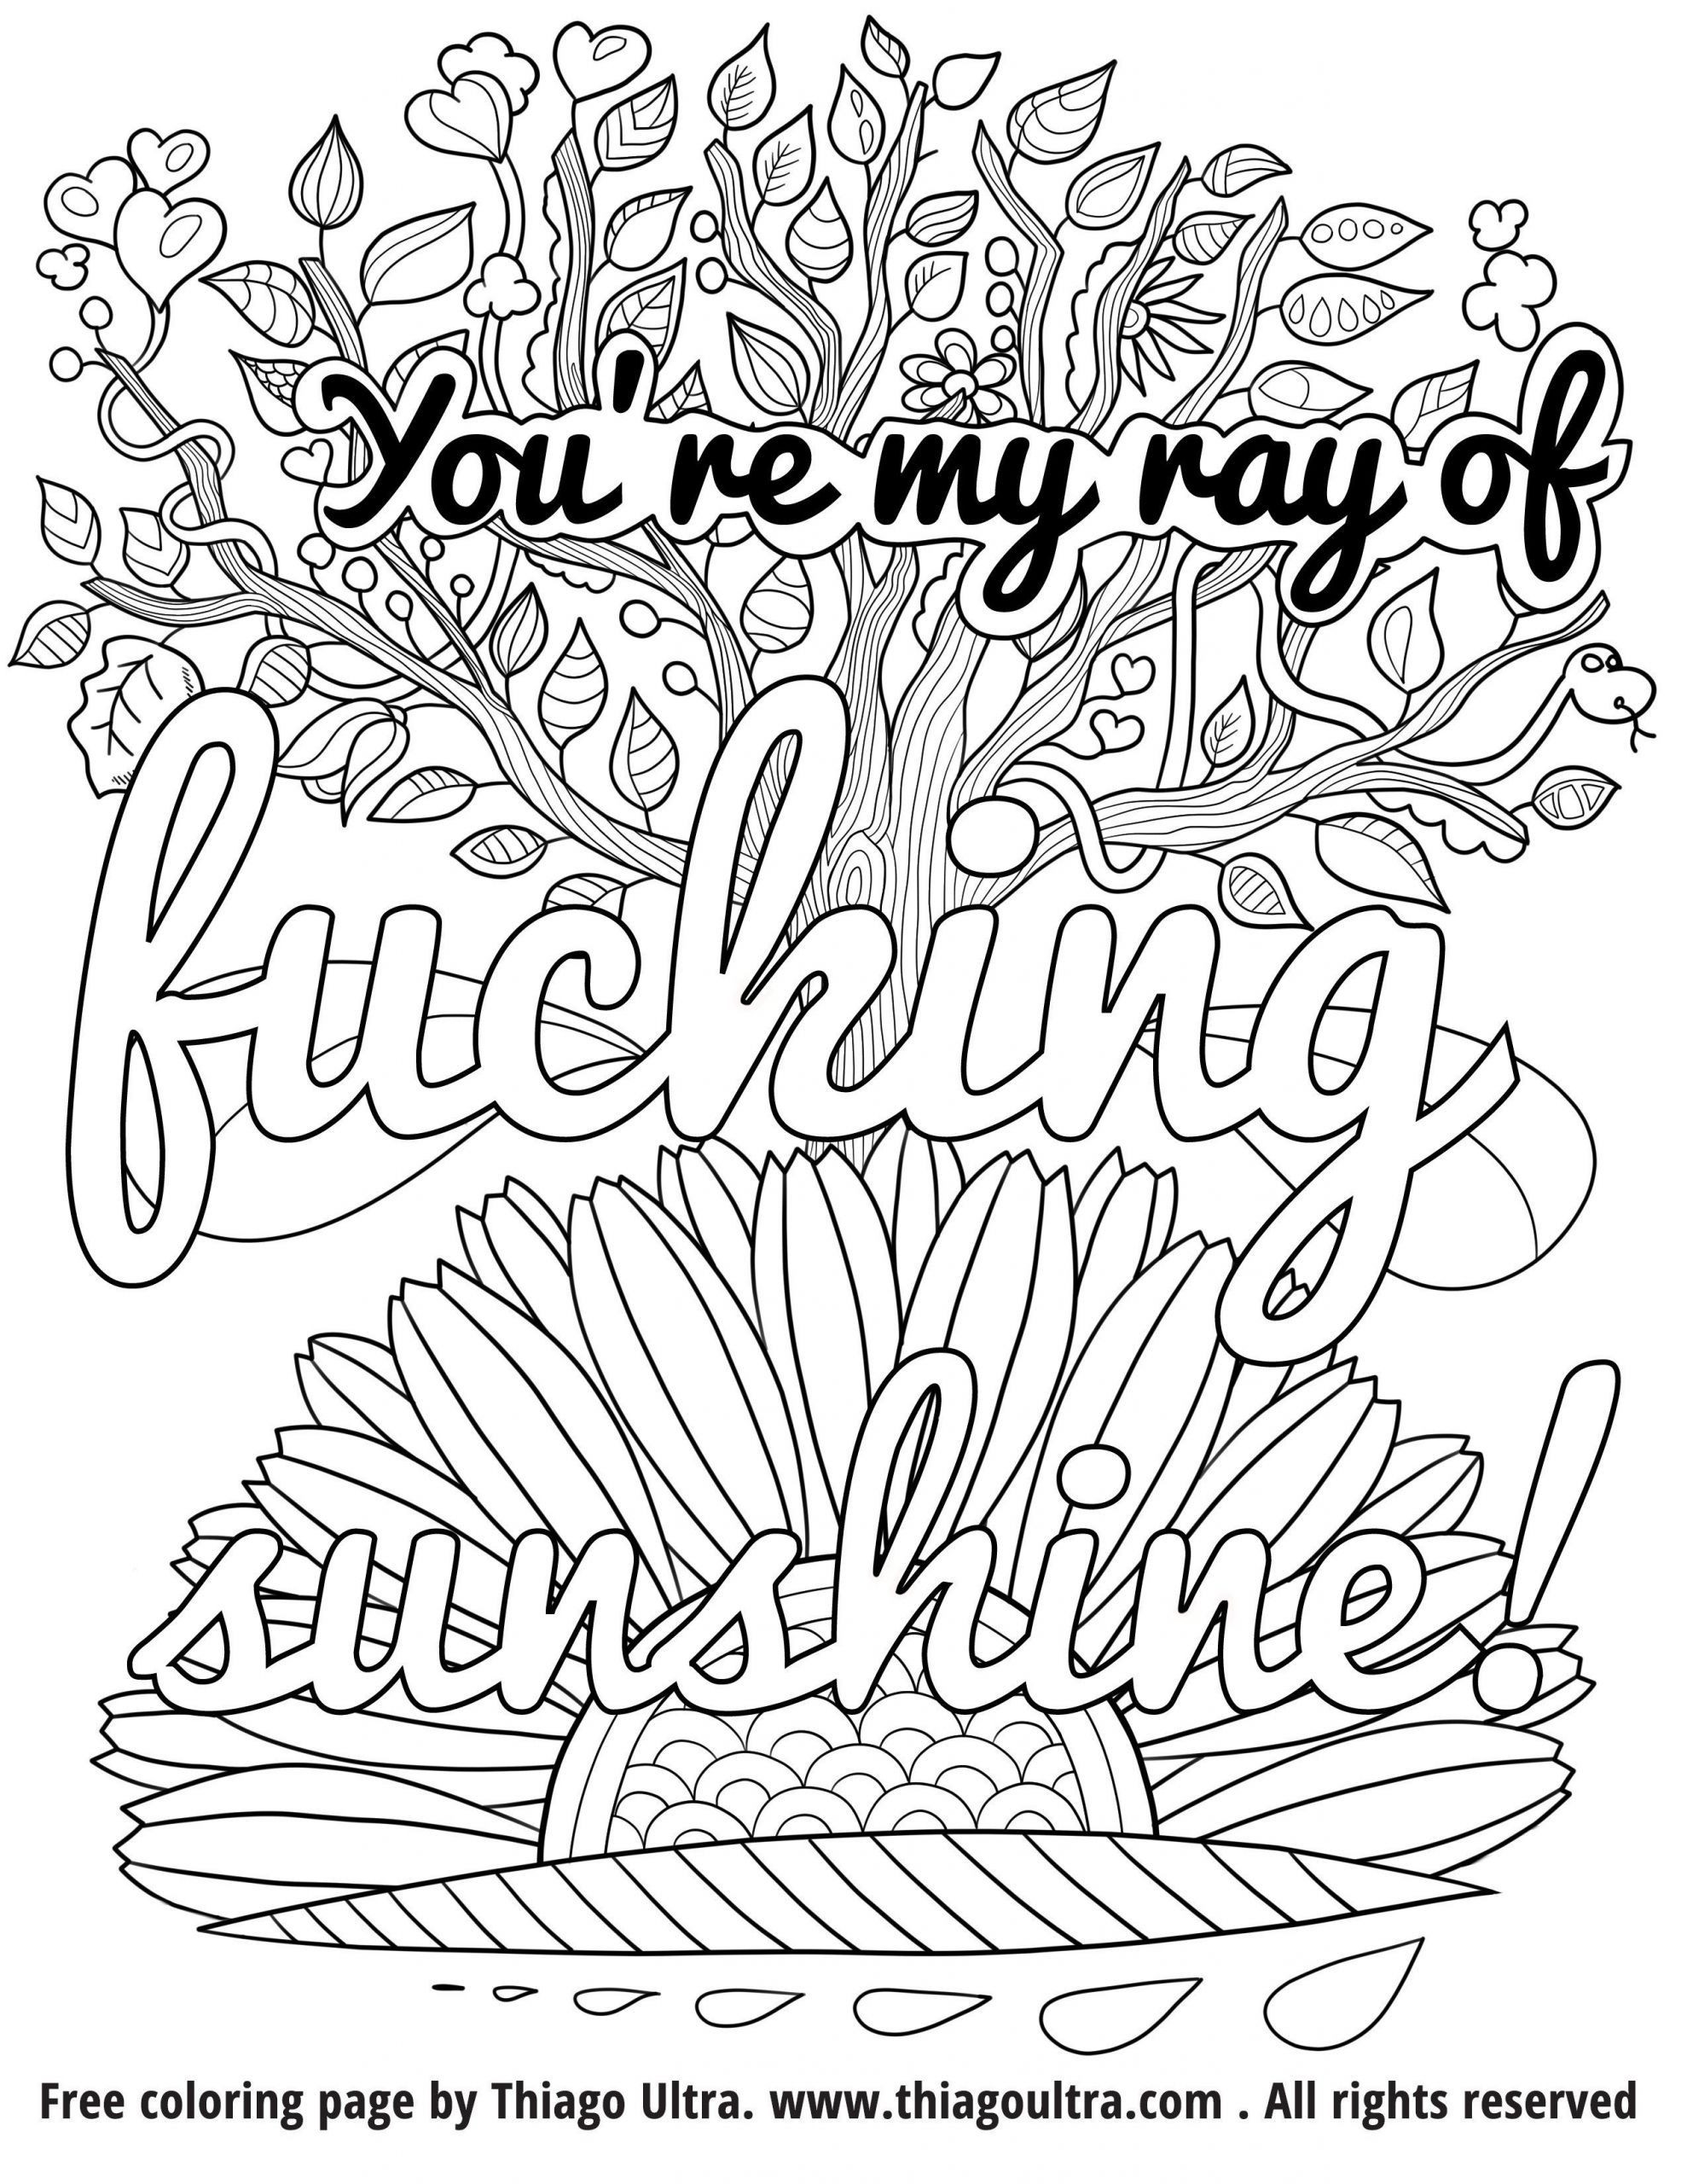 Coloring Pages Free Printable Coloring Book Pages For Adults Swear Words Free Printable Coloring Pagess Coloring Home